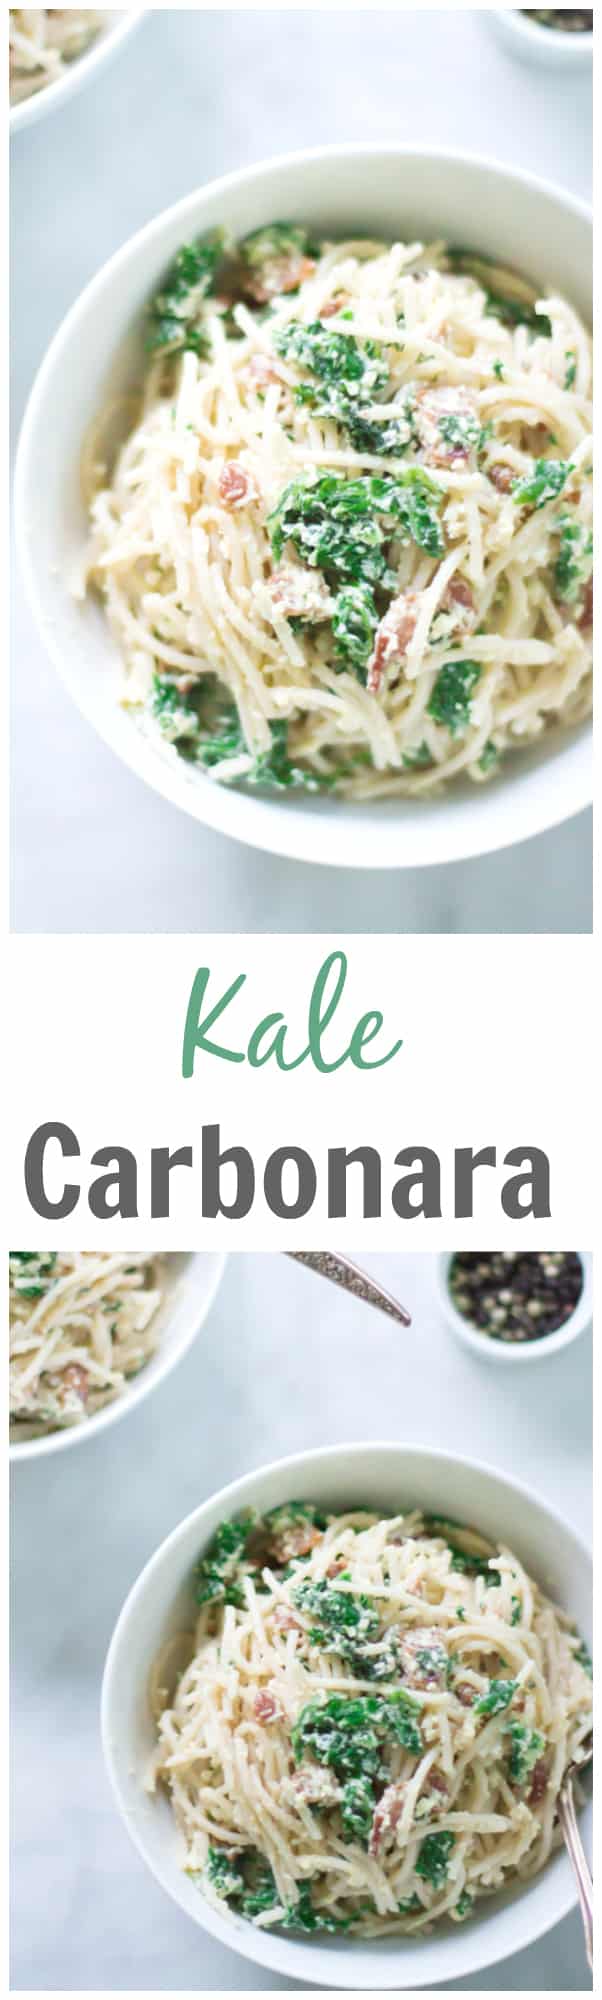 Kale Carbonara - Make this classic Italian Carbonara recipe packed with eggs, cheese, bacon and kale. This is definitely a super easy, quick and rich recipe for dinner. 